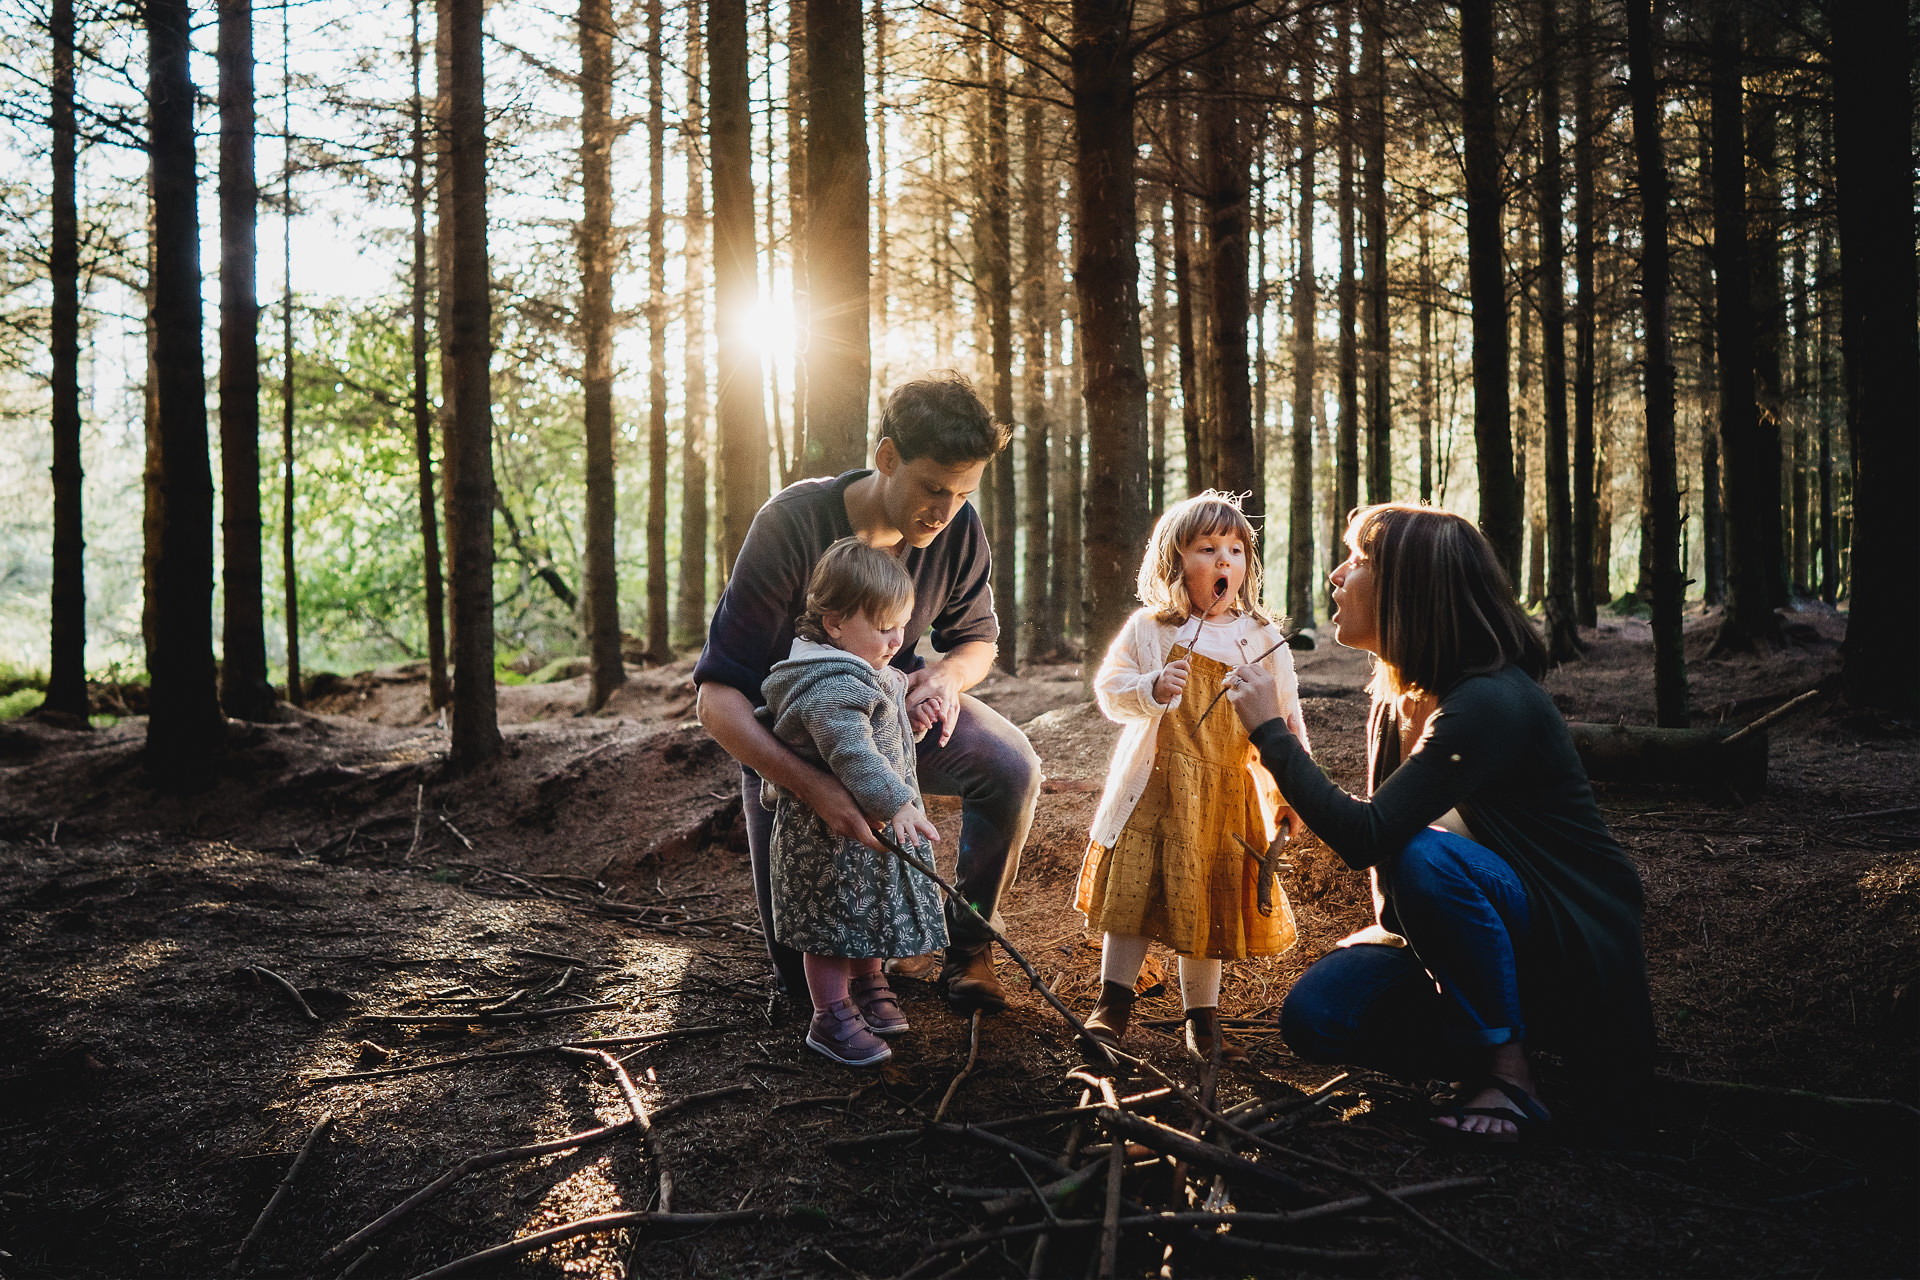 A family pretending to toast marshmallows over an imaginary fire in the woods with beautiful sunlight